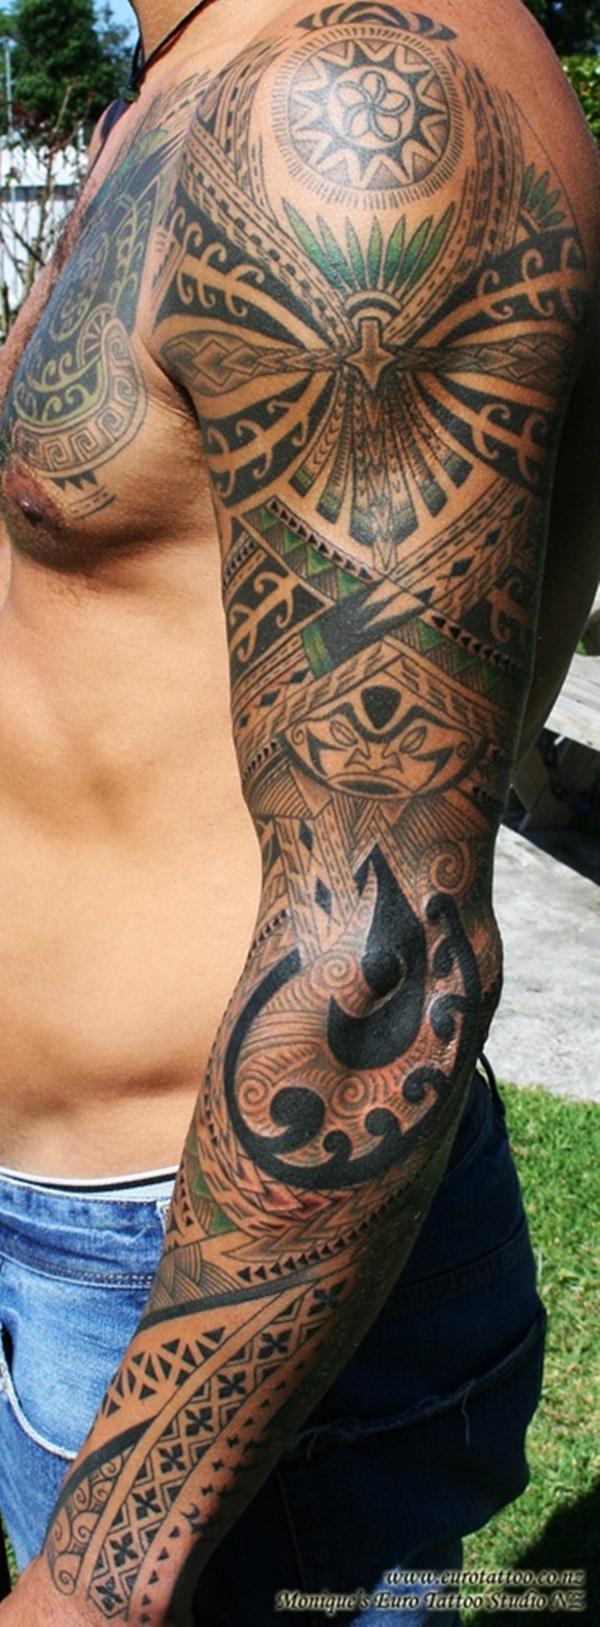 Tribal Tattoo Design Shapes and Patterns - YouTube